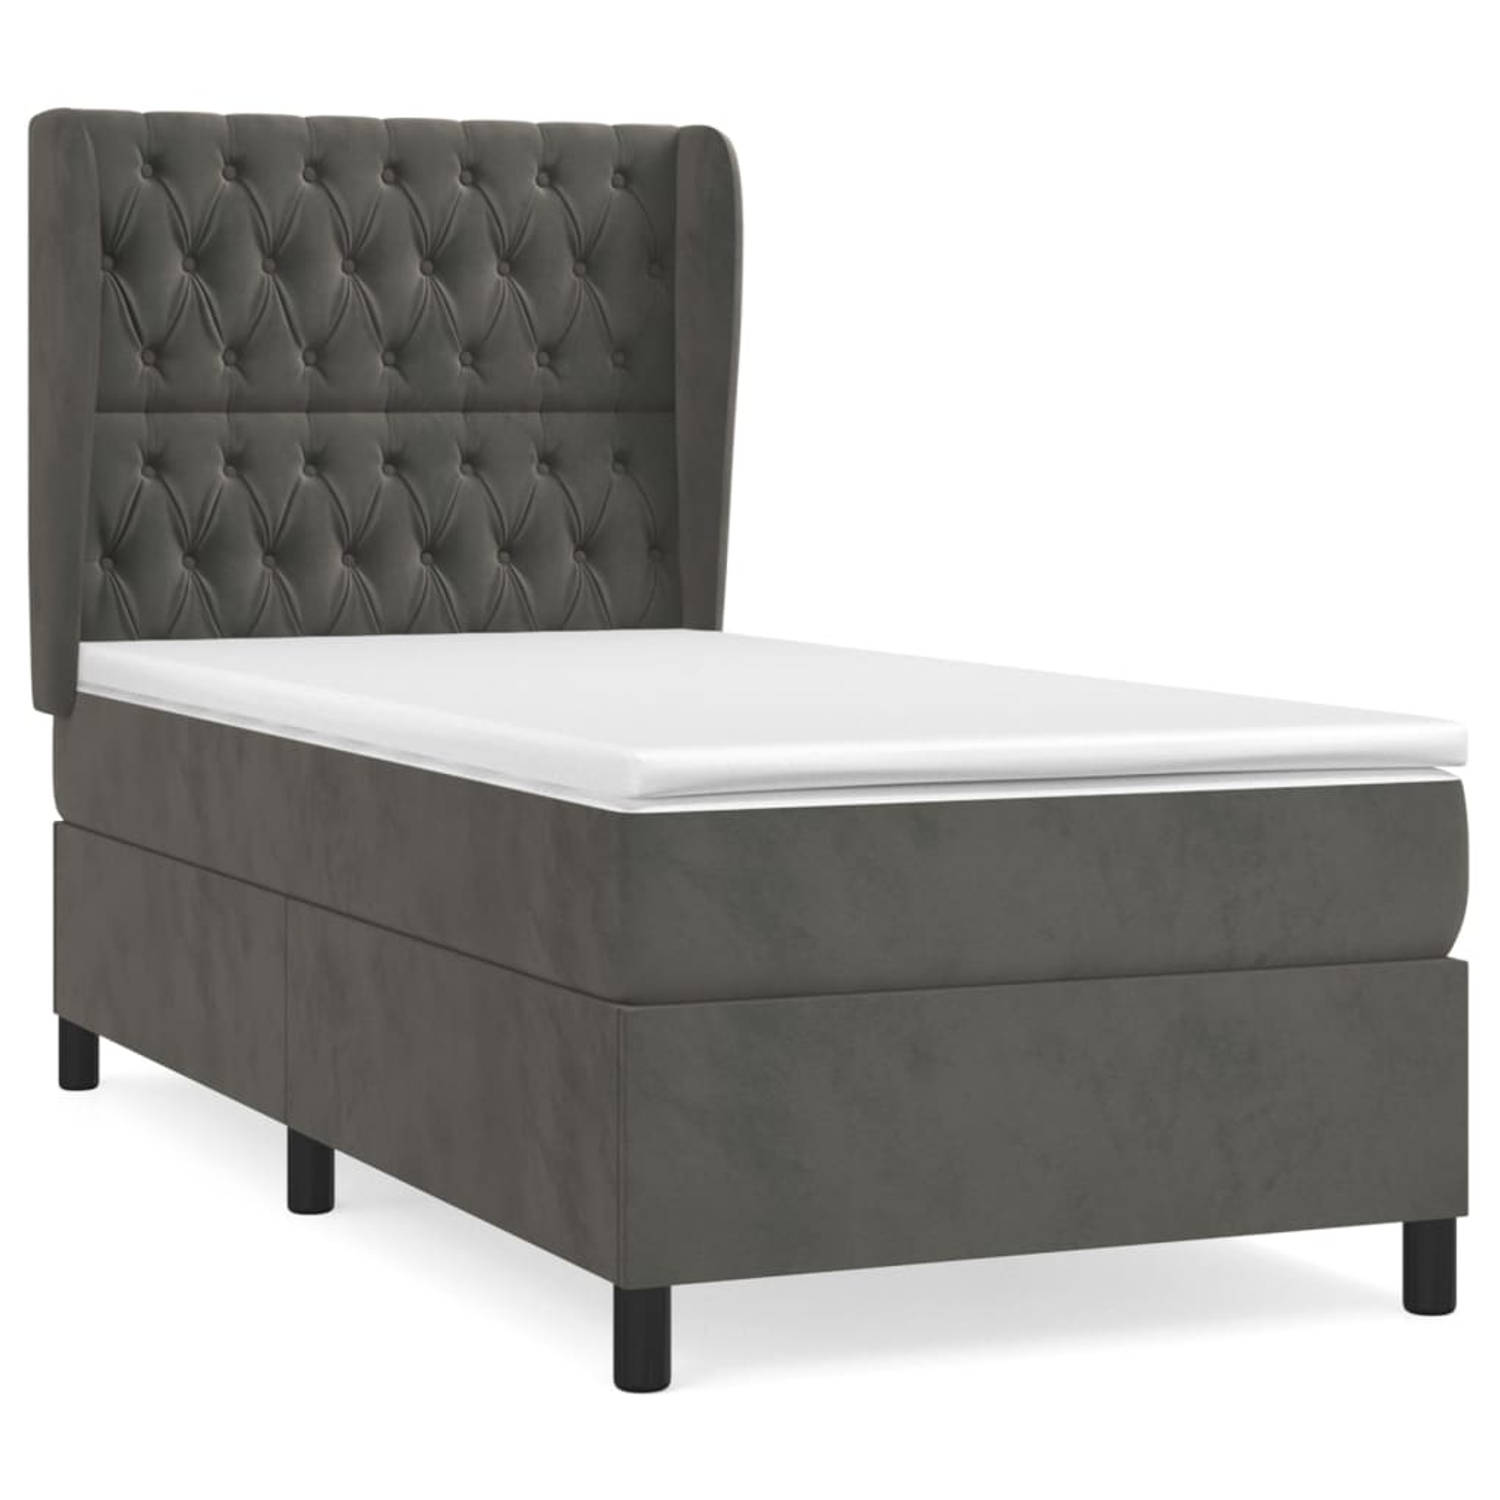 The Living Store Boxspringbed s - Bedframe and Matrassen Set - 203x93x118/128 cm - Donkergrijs